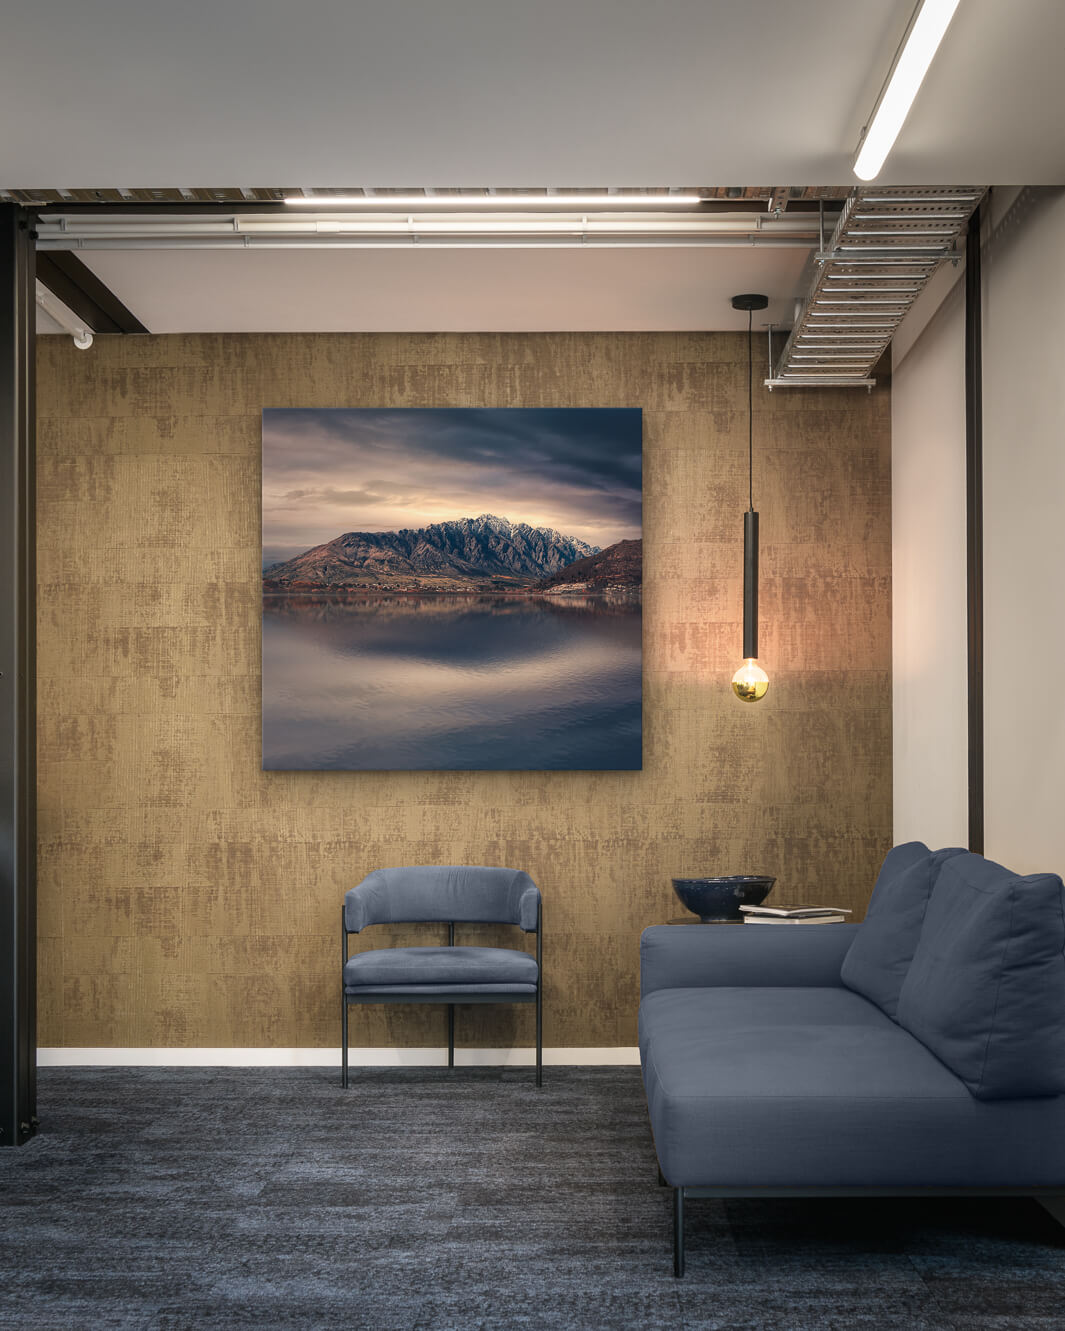 Canvas wall art photo print of The Remarkables mountain range near Queenstown on a commercial wall space